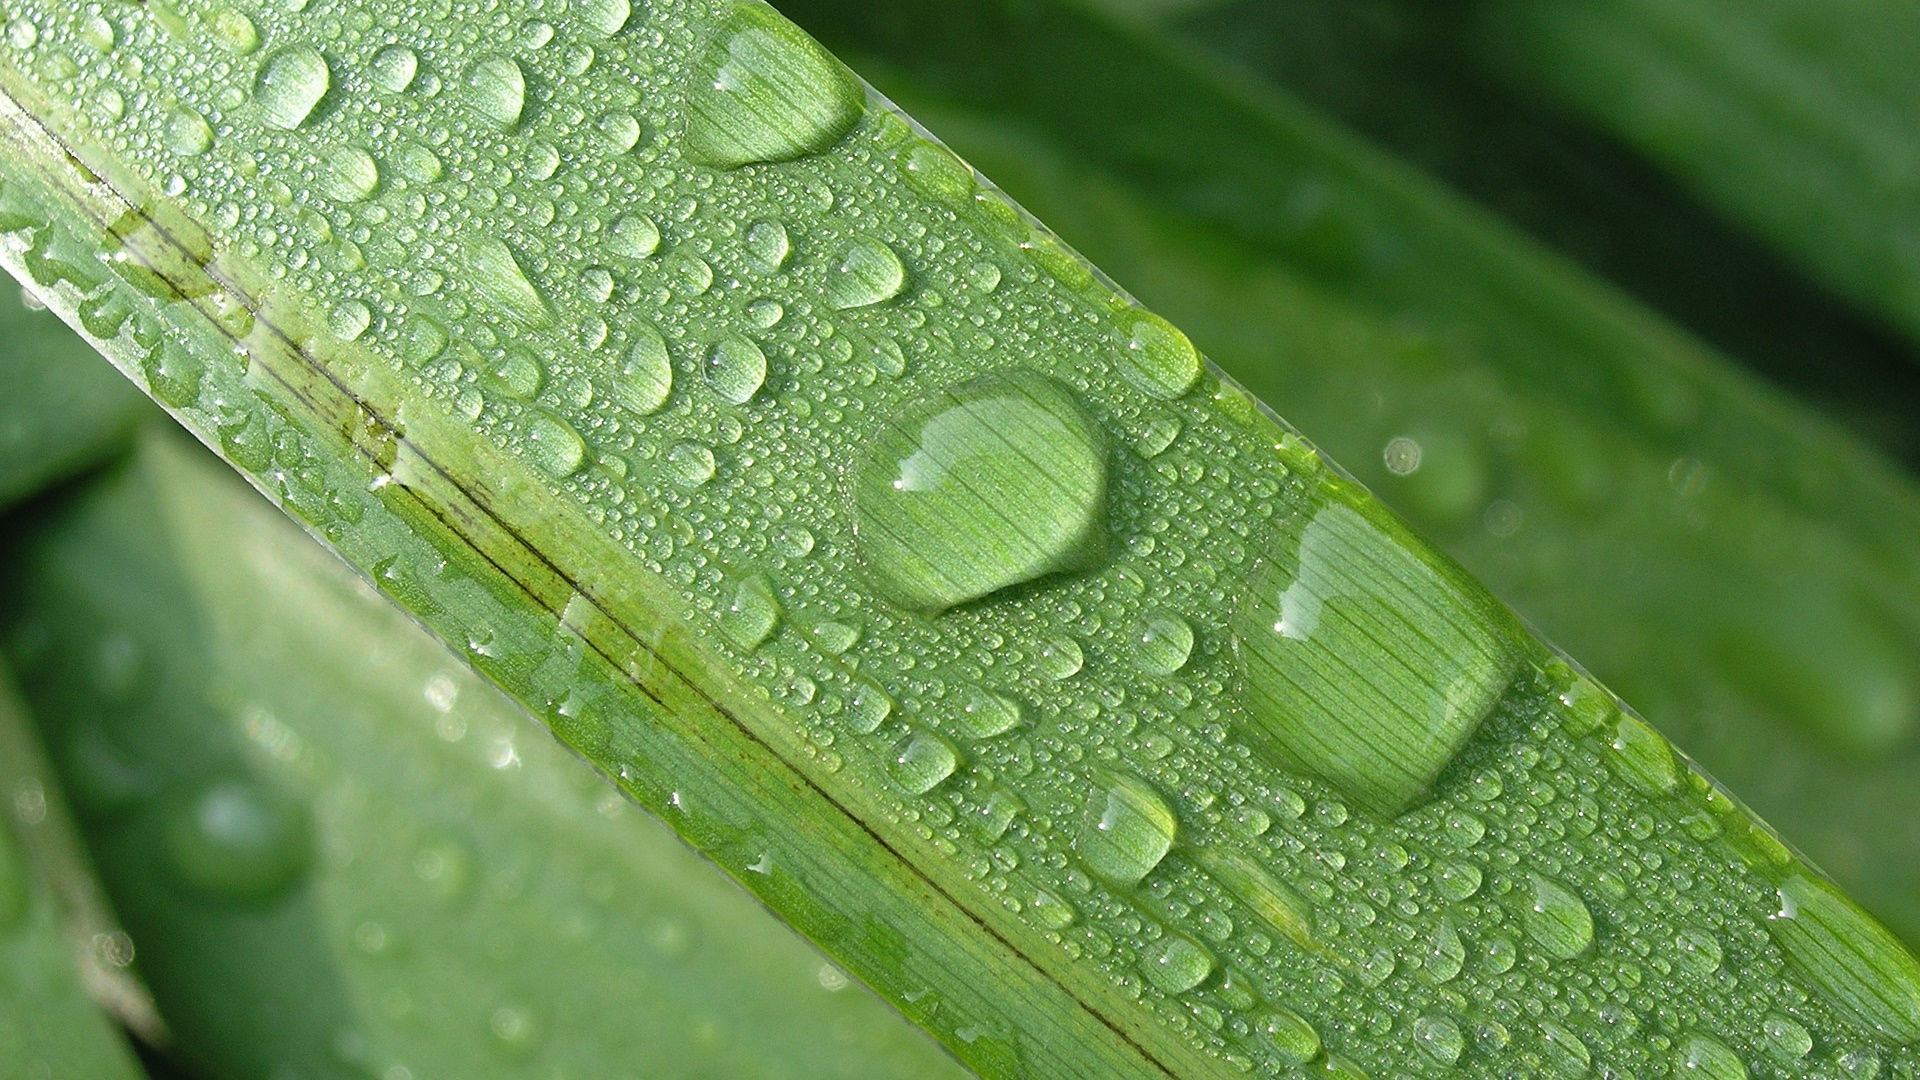 Grass leaves, water droplets 1920x1080 wallpaper